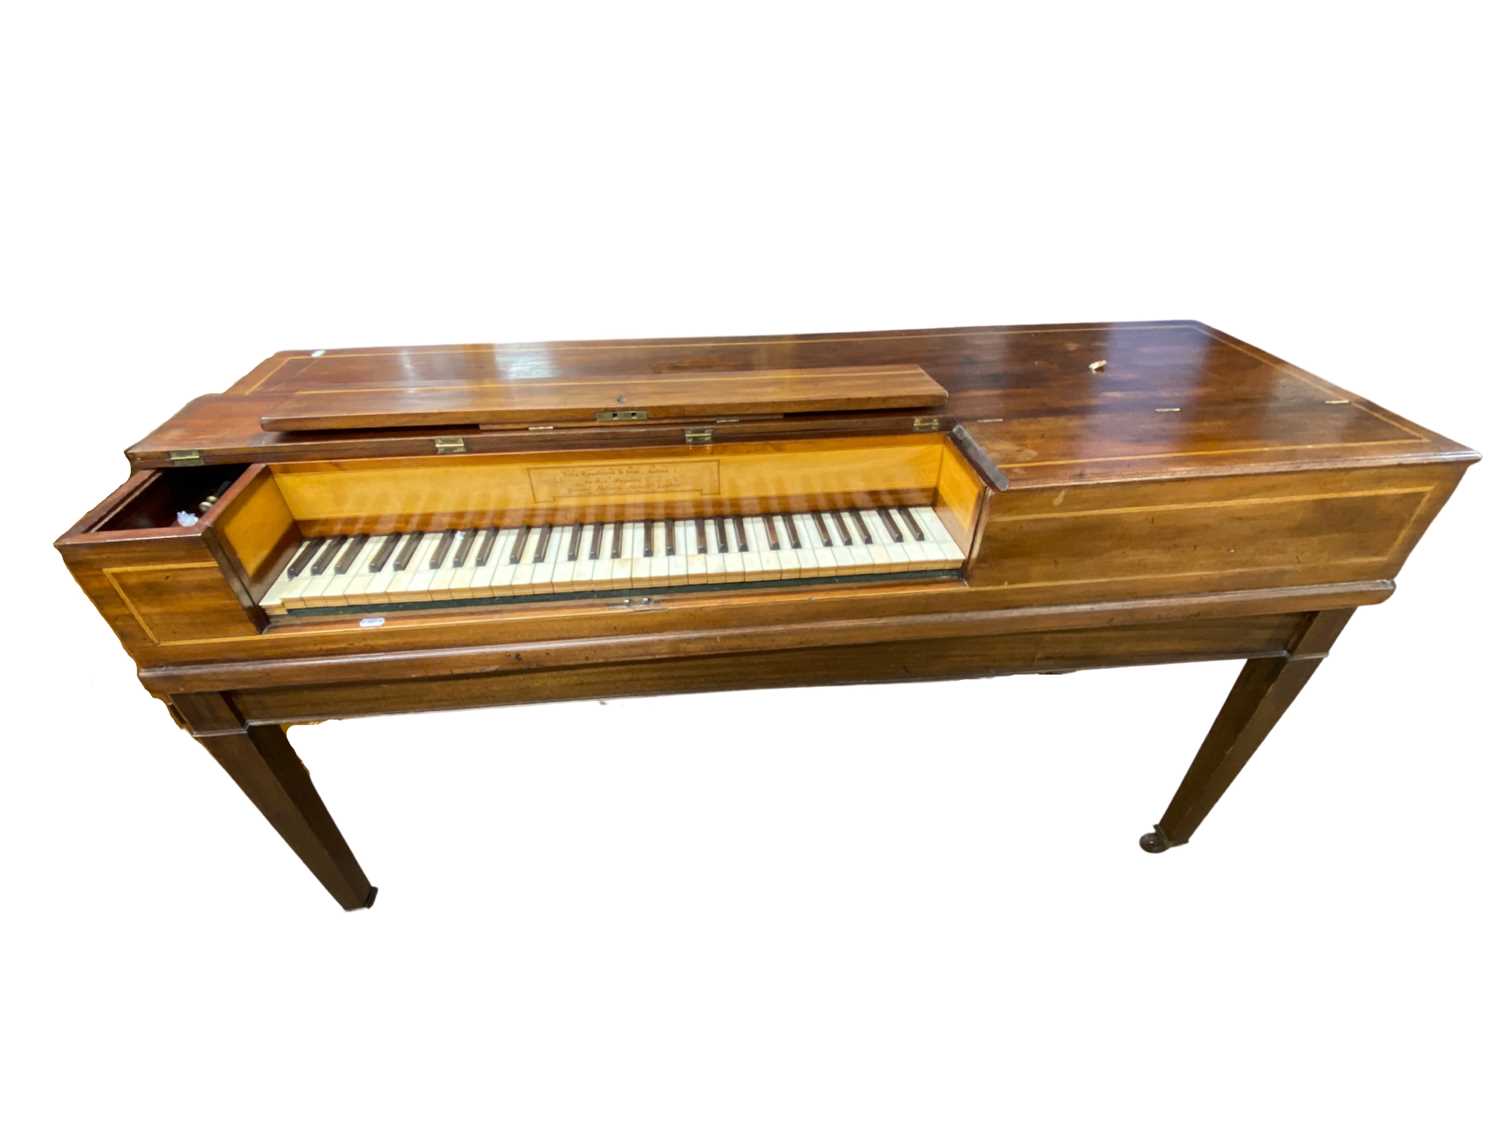 John Broadwood & Sons Makers, Great Putney Street, London, a 19th Century spinet or square piano set